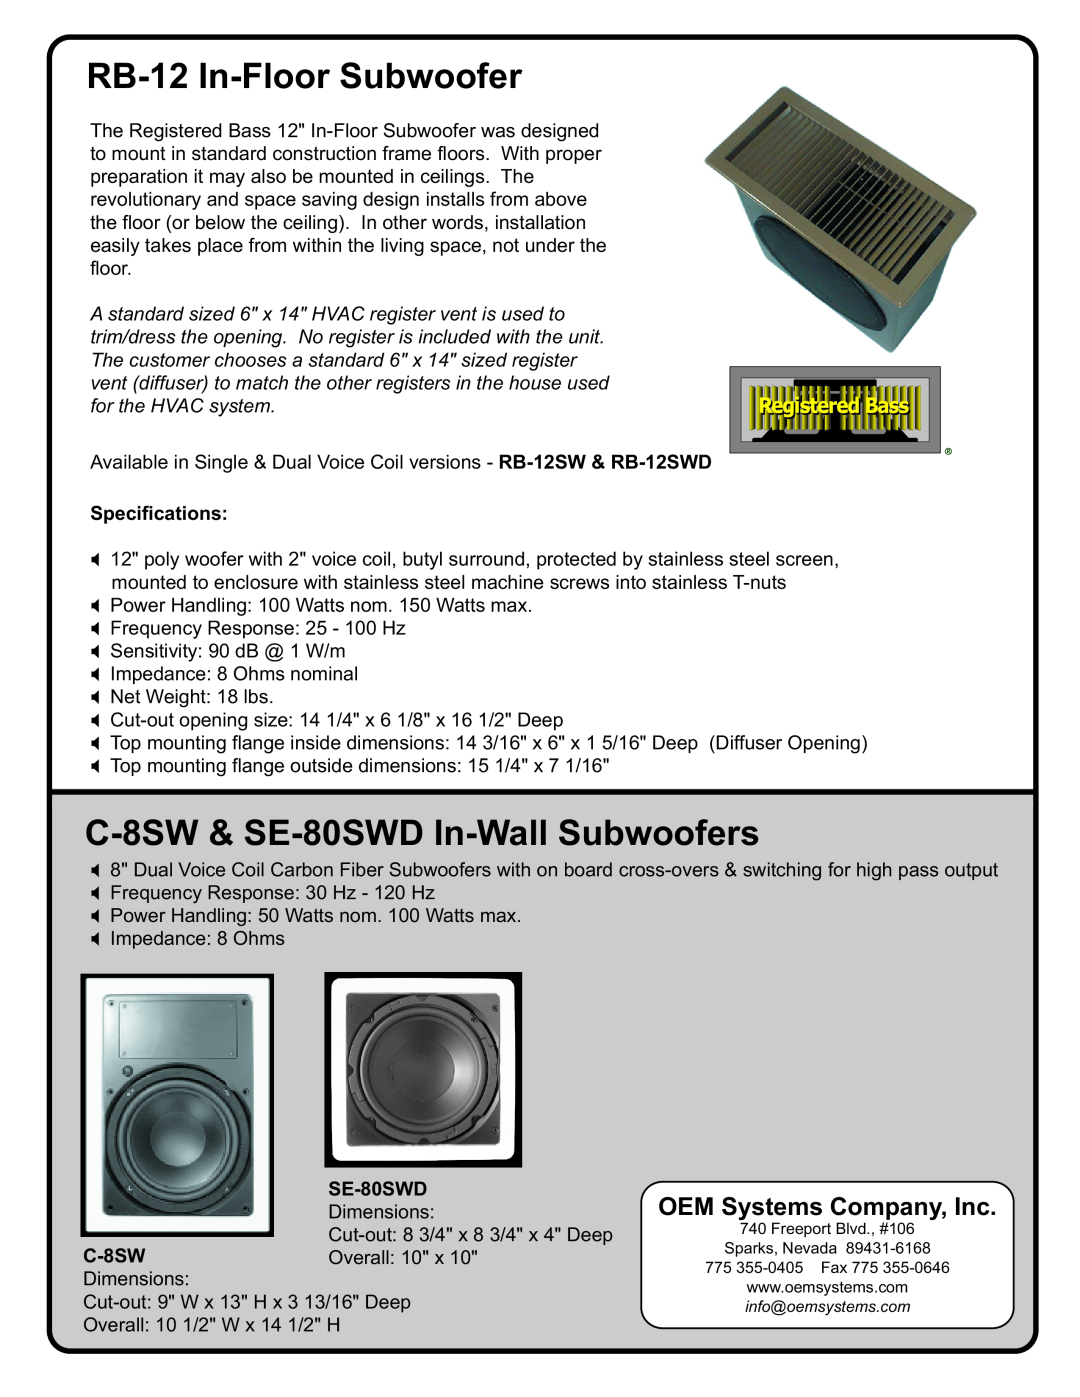 OEM Systems dimensions RB-12 In-FloorSubwoofer, C-8SW& SE-80SWD In-WallSubwoofers, OEM Systems Company, Inc 